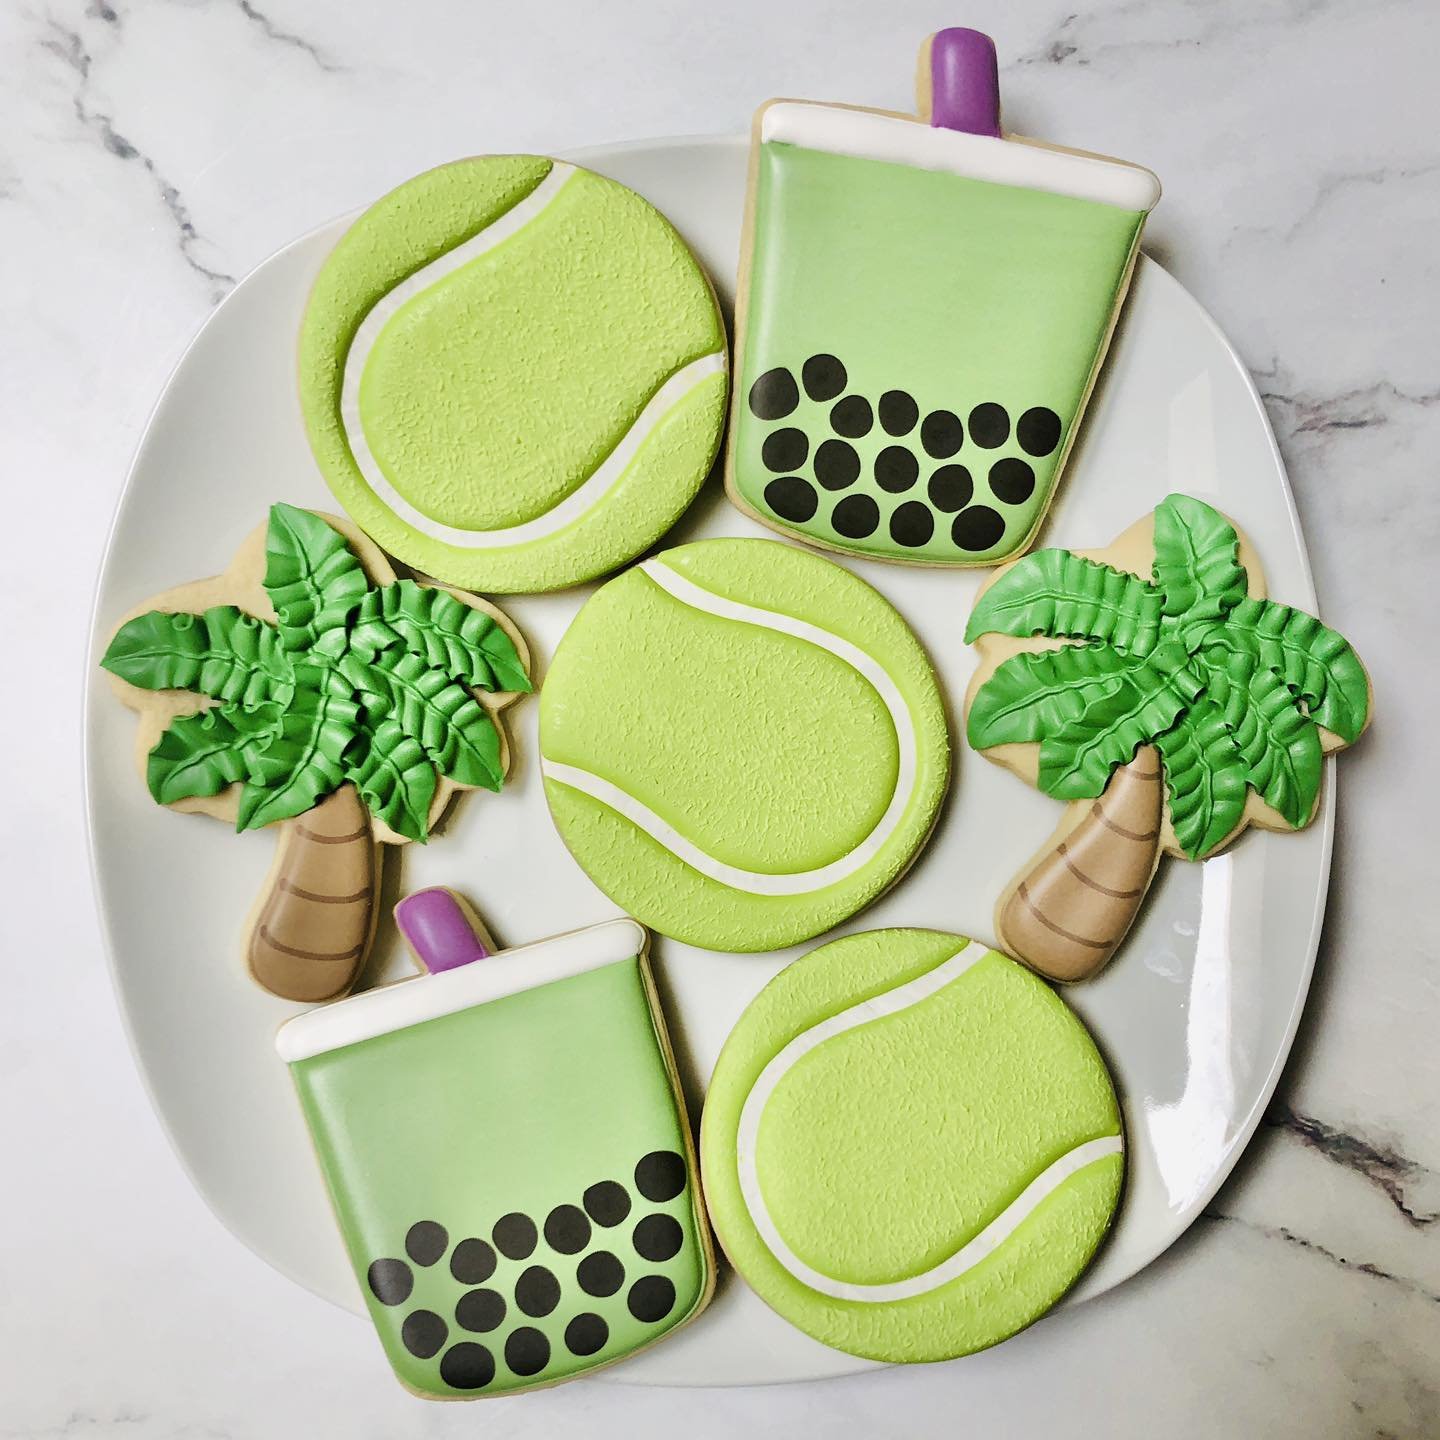 A favorites set to share for a birthday celebration! 🎉🧋🎾🌴
.
.
.
.
. 
#favorite #tenniscookies #tennis #bobacookies #boba #palmtreecookies #palmtrees #happybirthday #happybirthdaycookies #birthdaycookies #birthdaytreats #birthdaypartyfavors #party